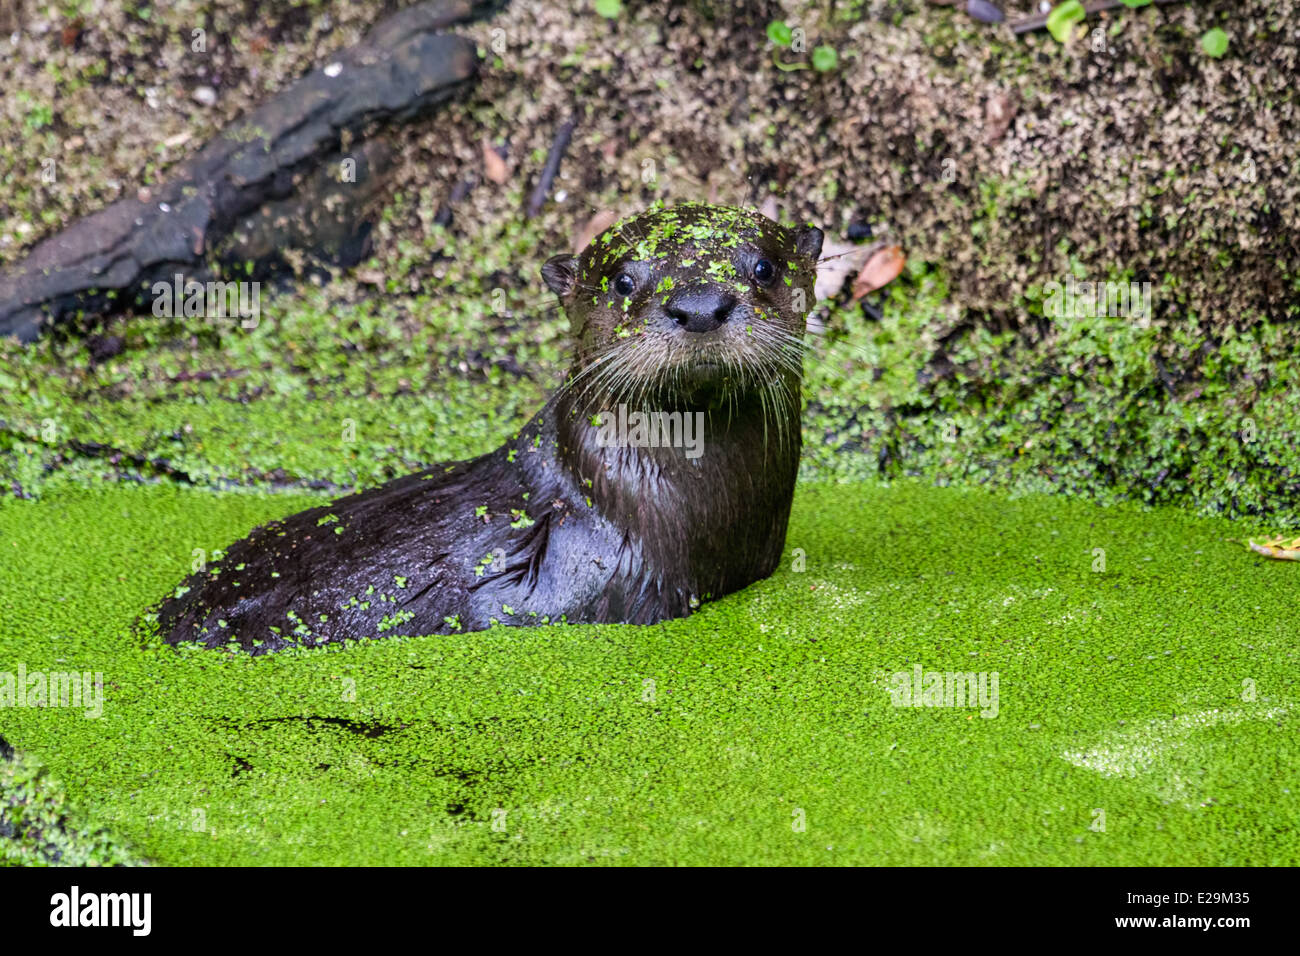 Young North American River Otter (Lontra canadensis) playing in the marsh, Egan's Creek Greenway, Florida Stock Photo